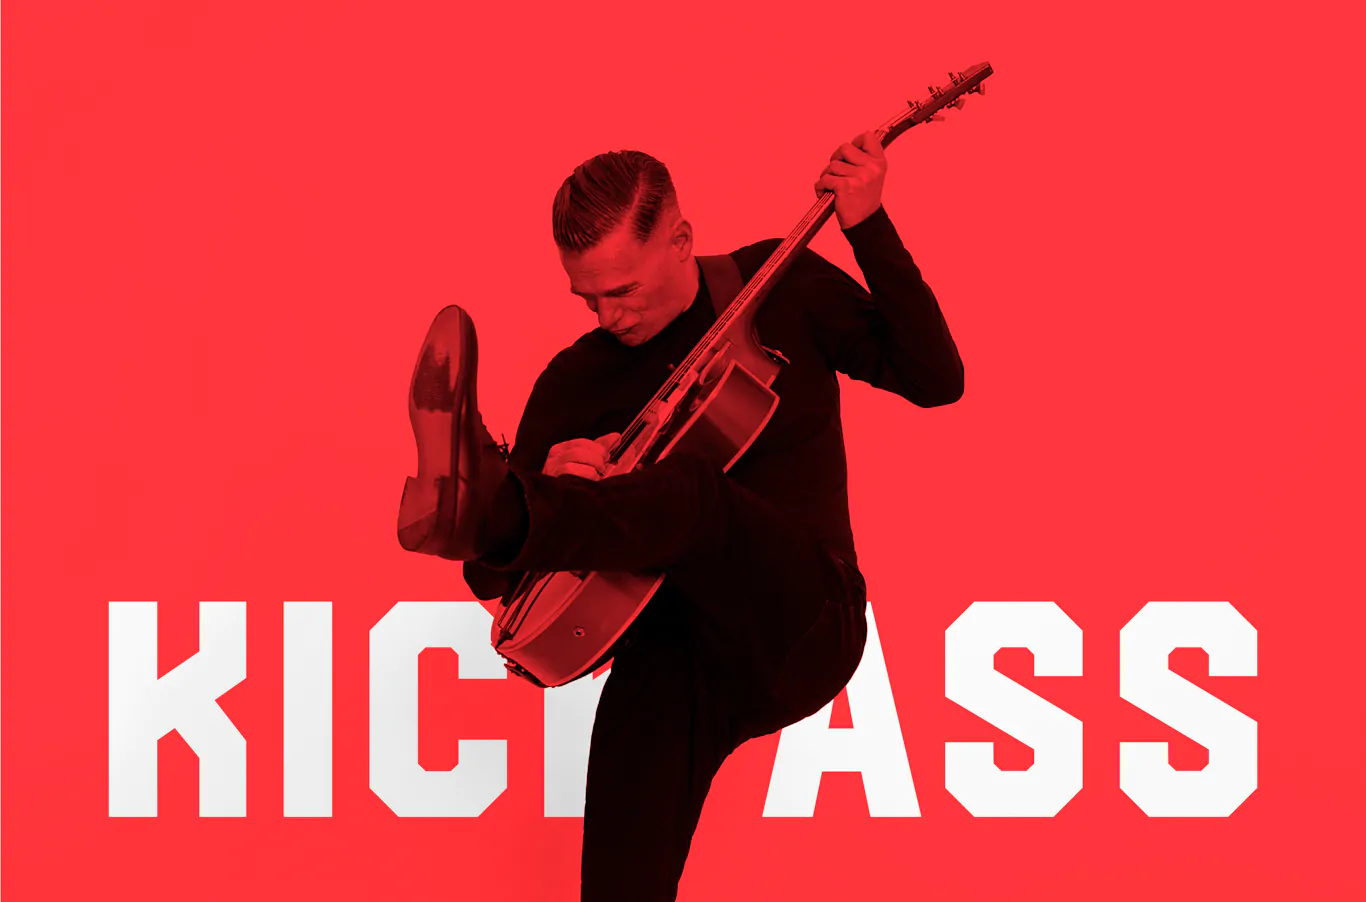 BRYAN ADAMS releases new song ‘Kick Ass’ – the latest song from his forthcoming studio album So Happy It Hurts